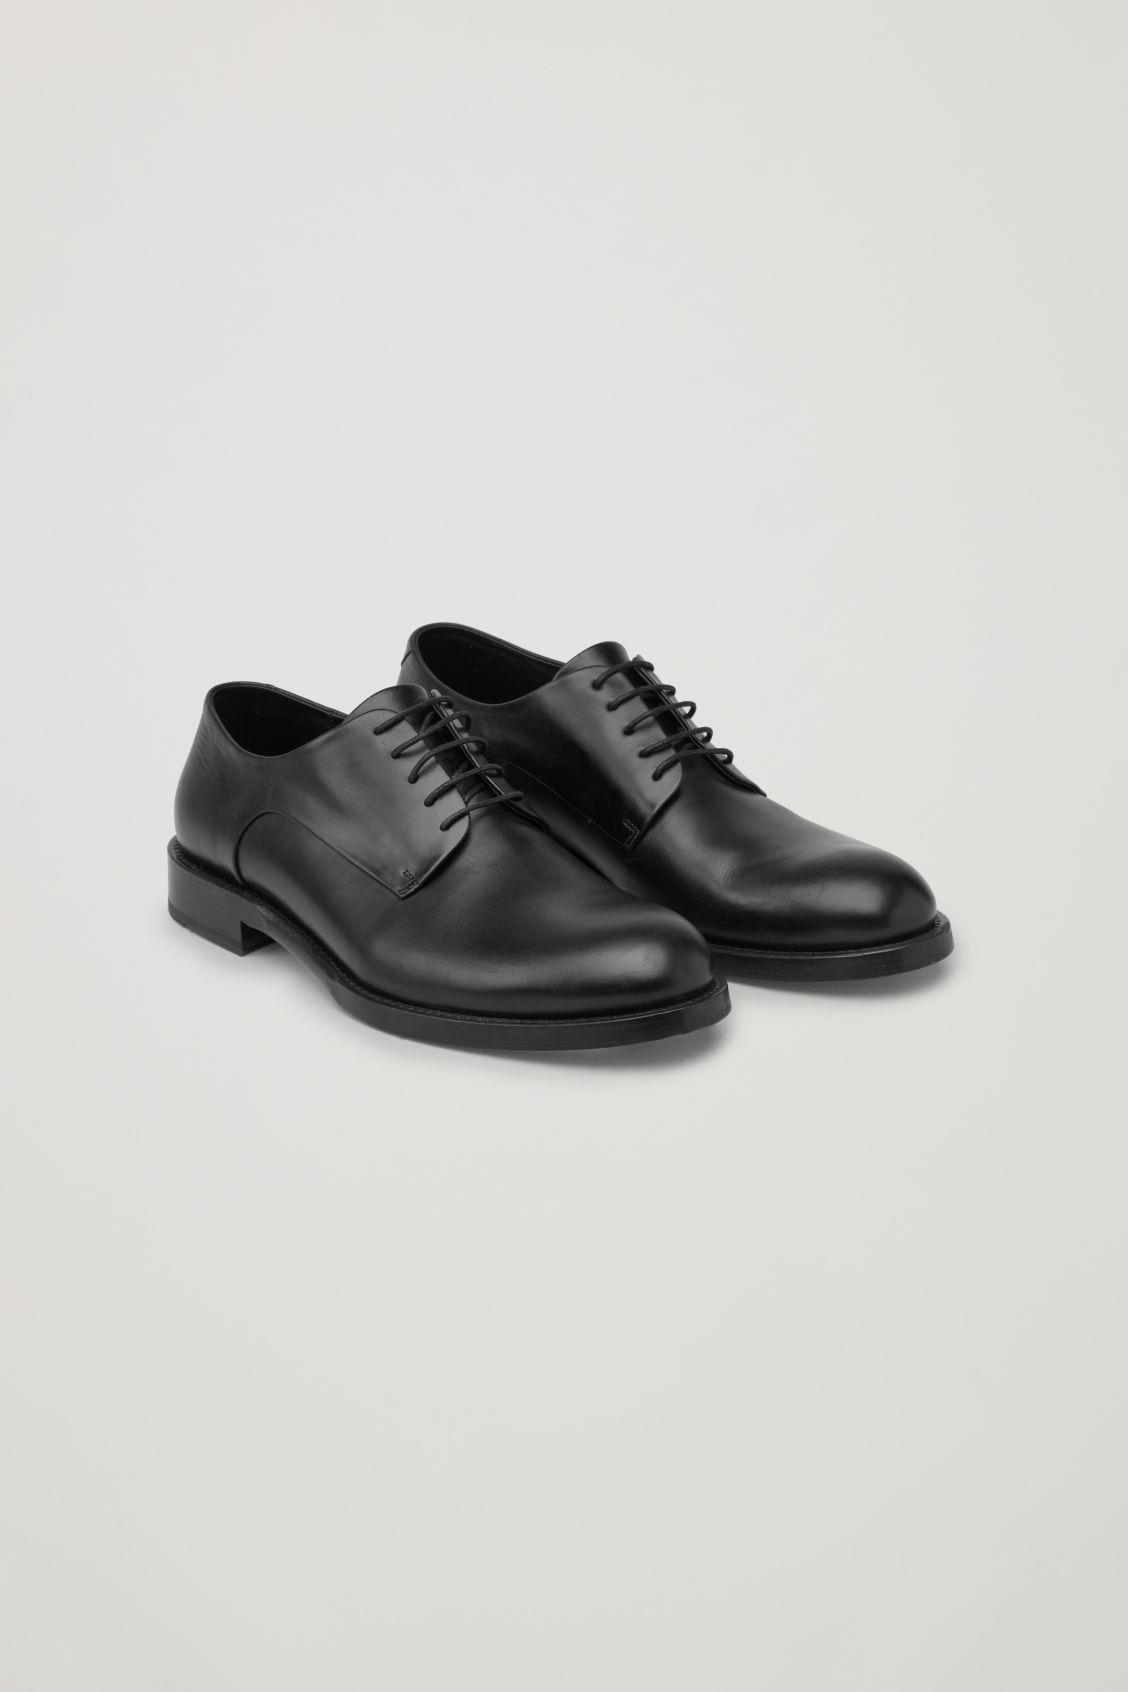 COS Matte-leather Derby Shoes in Black for Men